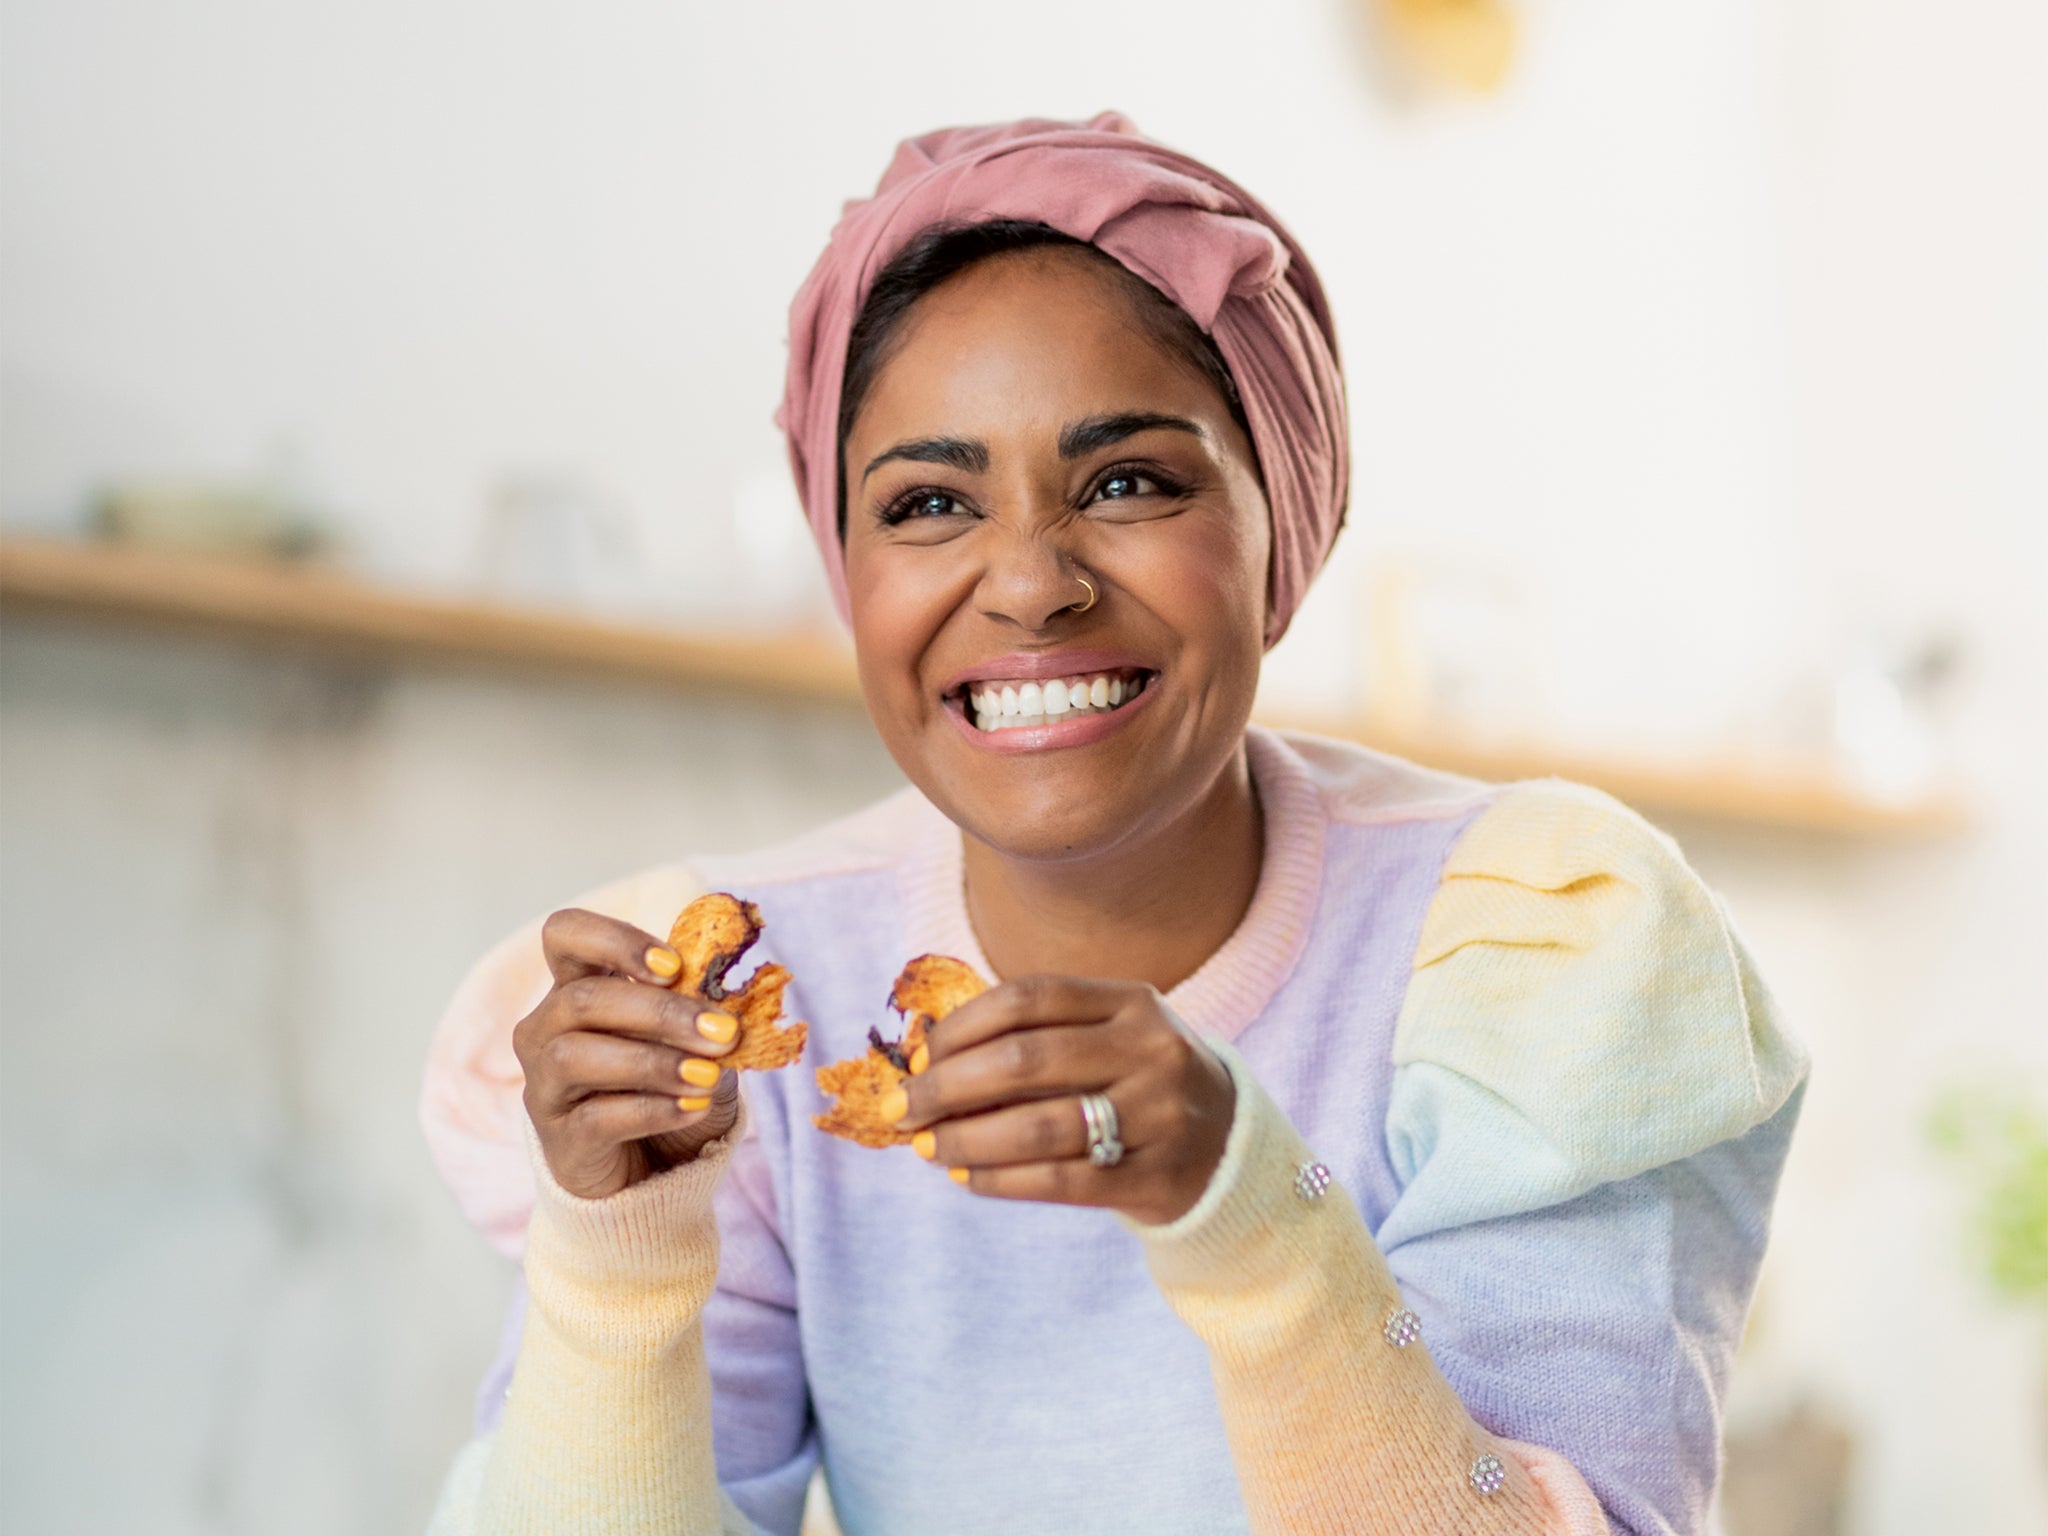 Nadiya Hussain has finally overcome her shyness | The Independent